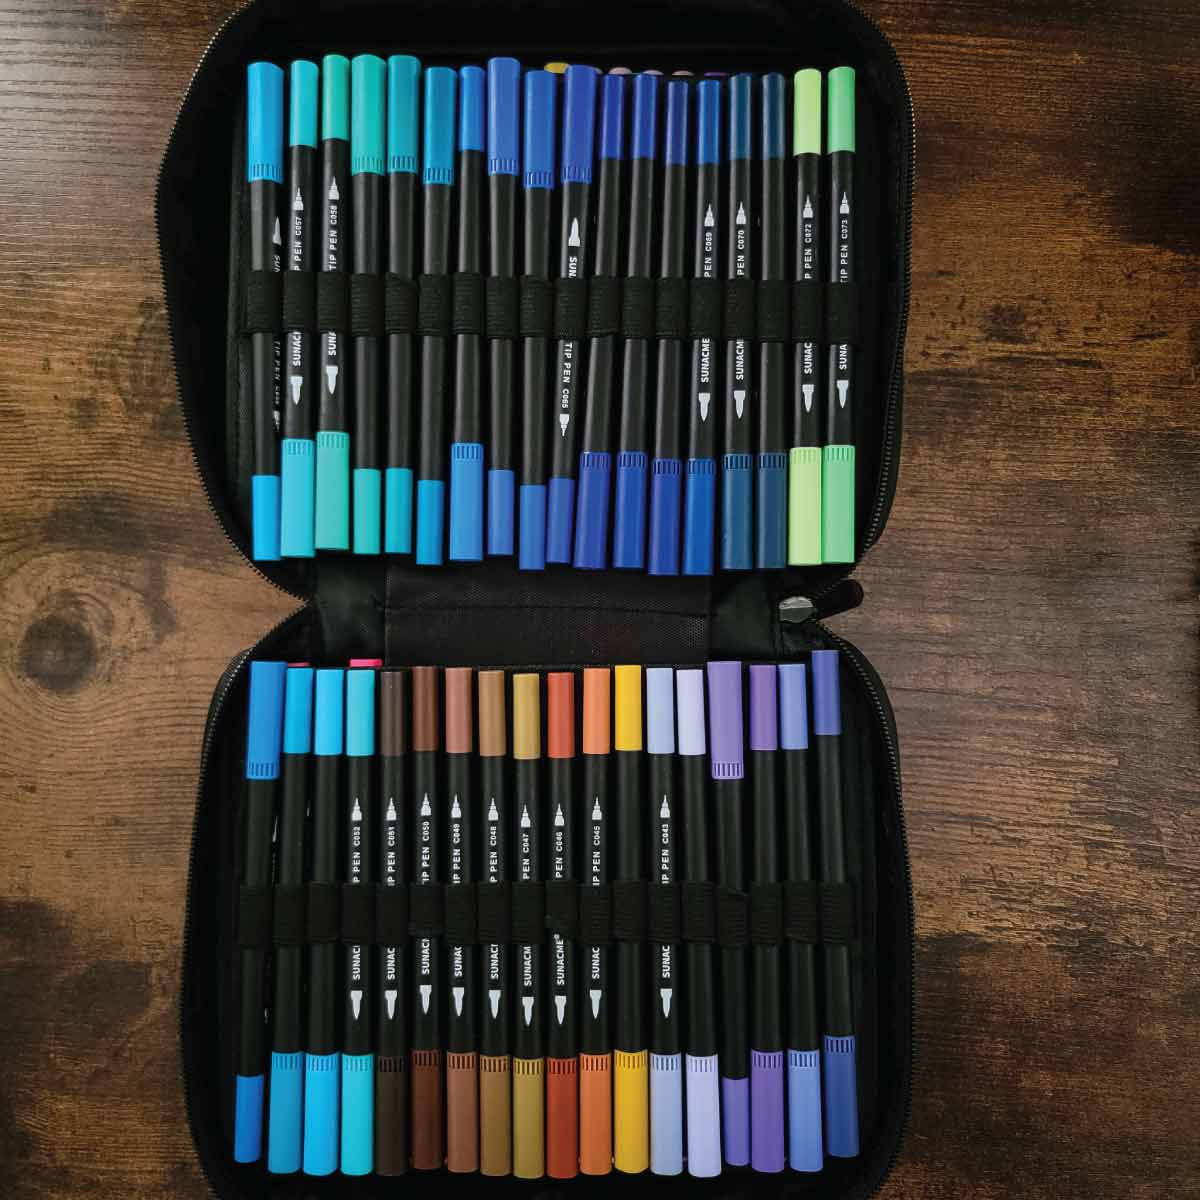 Set of Sunacme markers with the case open to show the markers in the carrying case they come with.